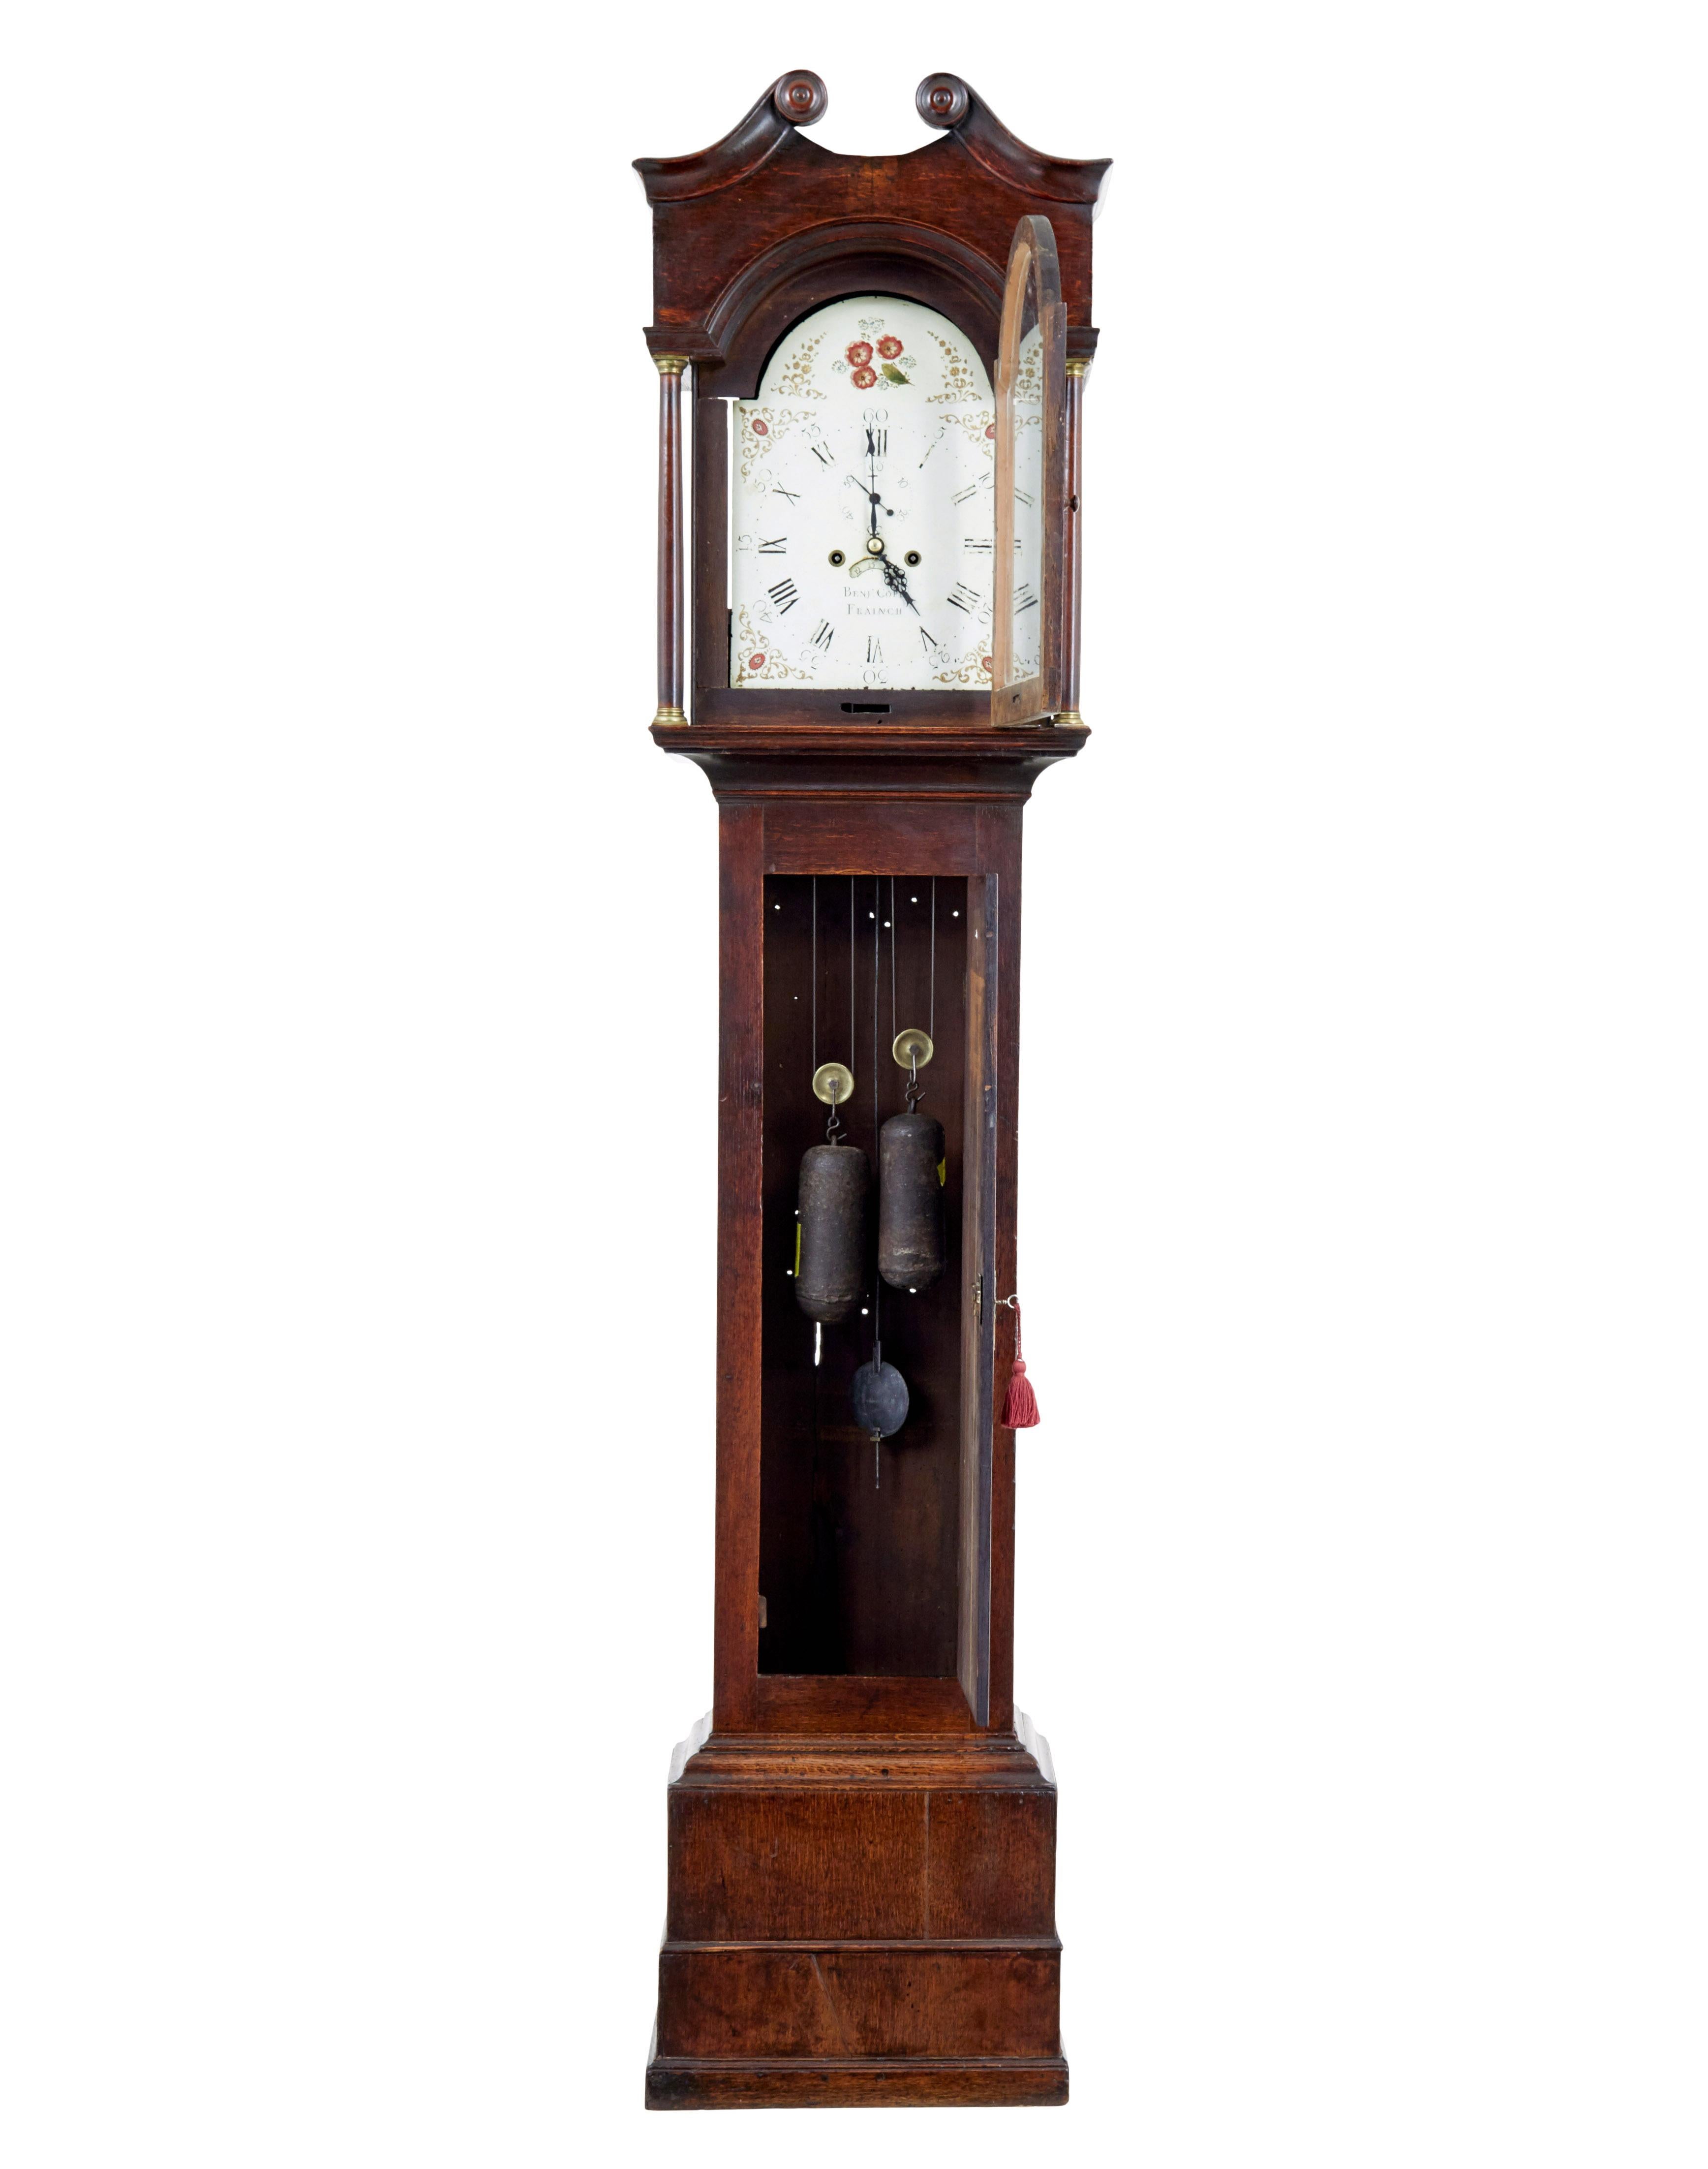 Georgian early 19th century oak long case clock circa 1810.

Grandfather clock by benjamin cope.  Movement has just been fully overhauled and professionally serviced.  Enamel clock face with roman numerals, hand painted floral decoration.  Makers